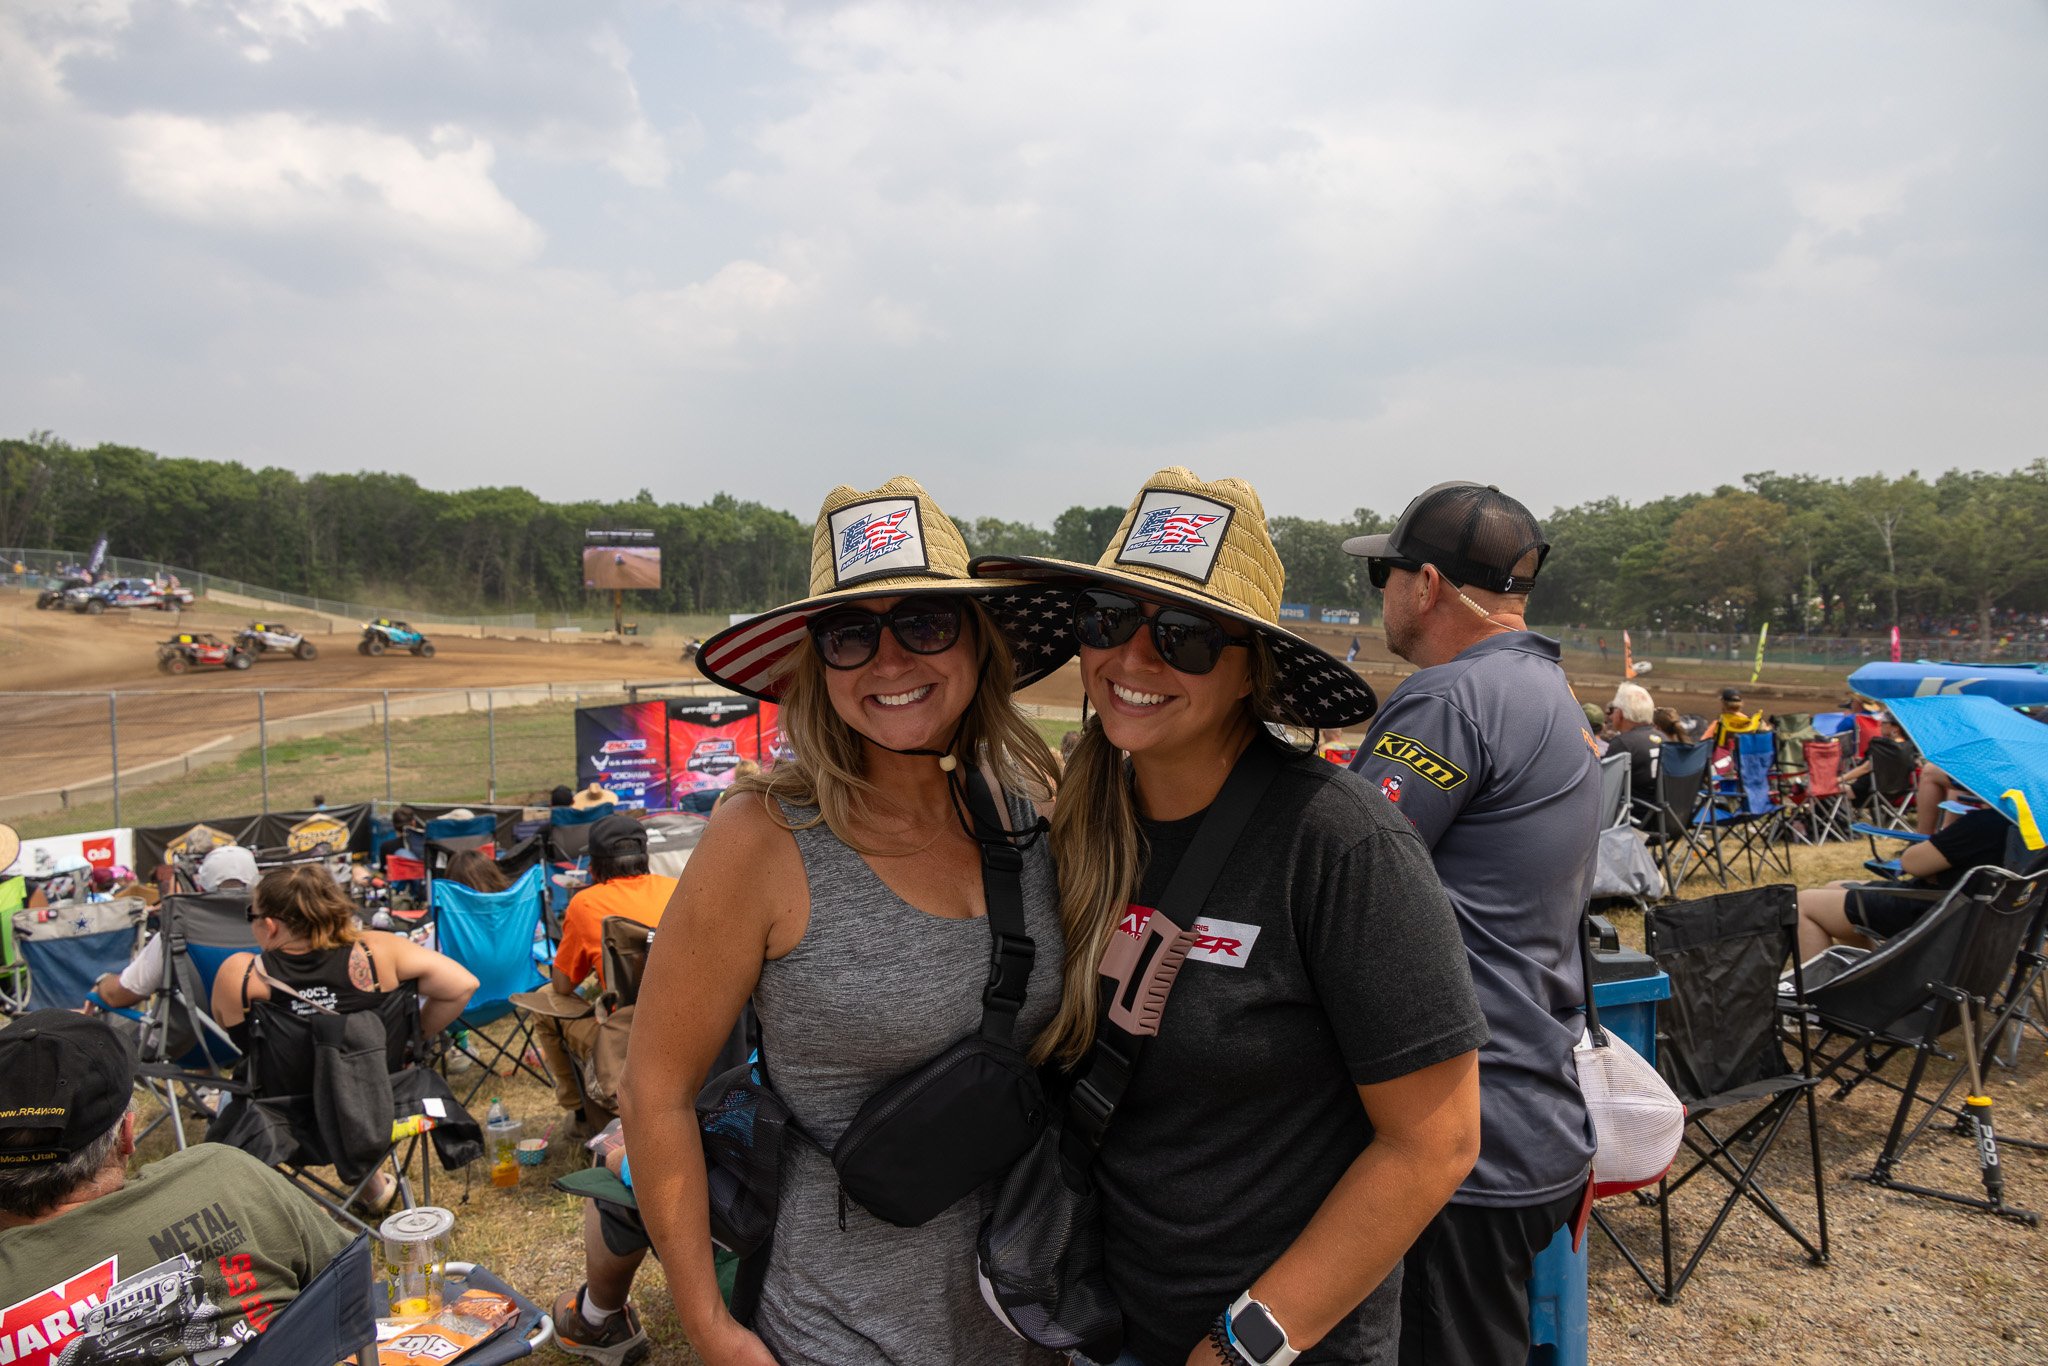 Fans soaking up the thrill and excitement at the ERX Off-Road National, where the spirit of racing comes alive. Mark your calendars for July 12-13th!